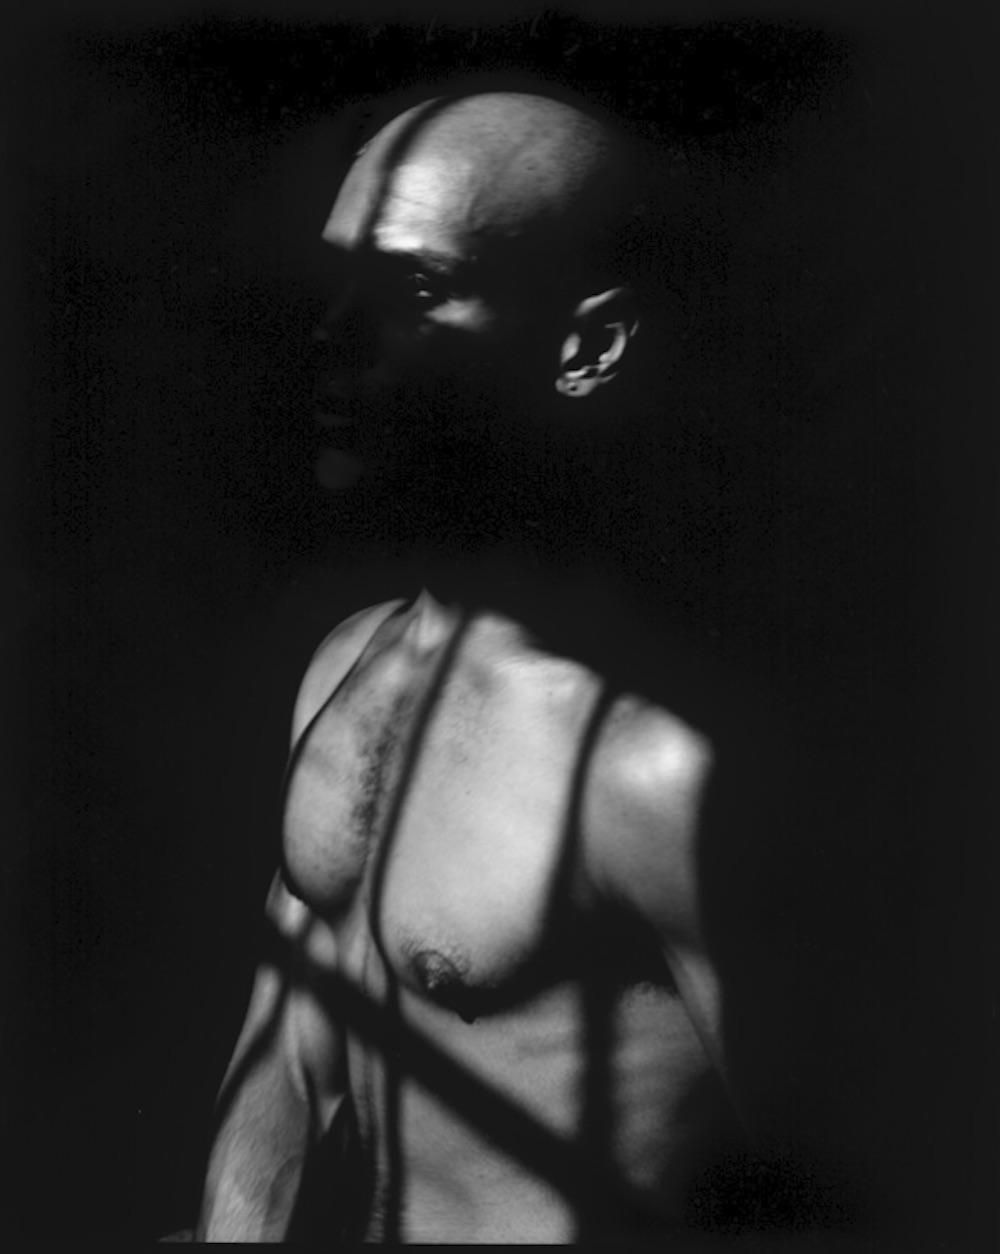 A shirtless man obscured in the shadows of a window.